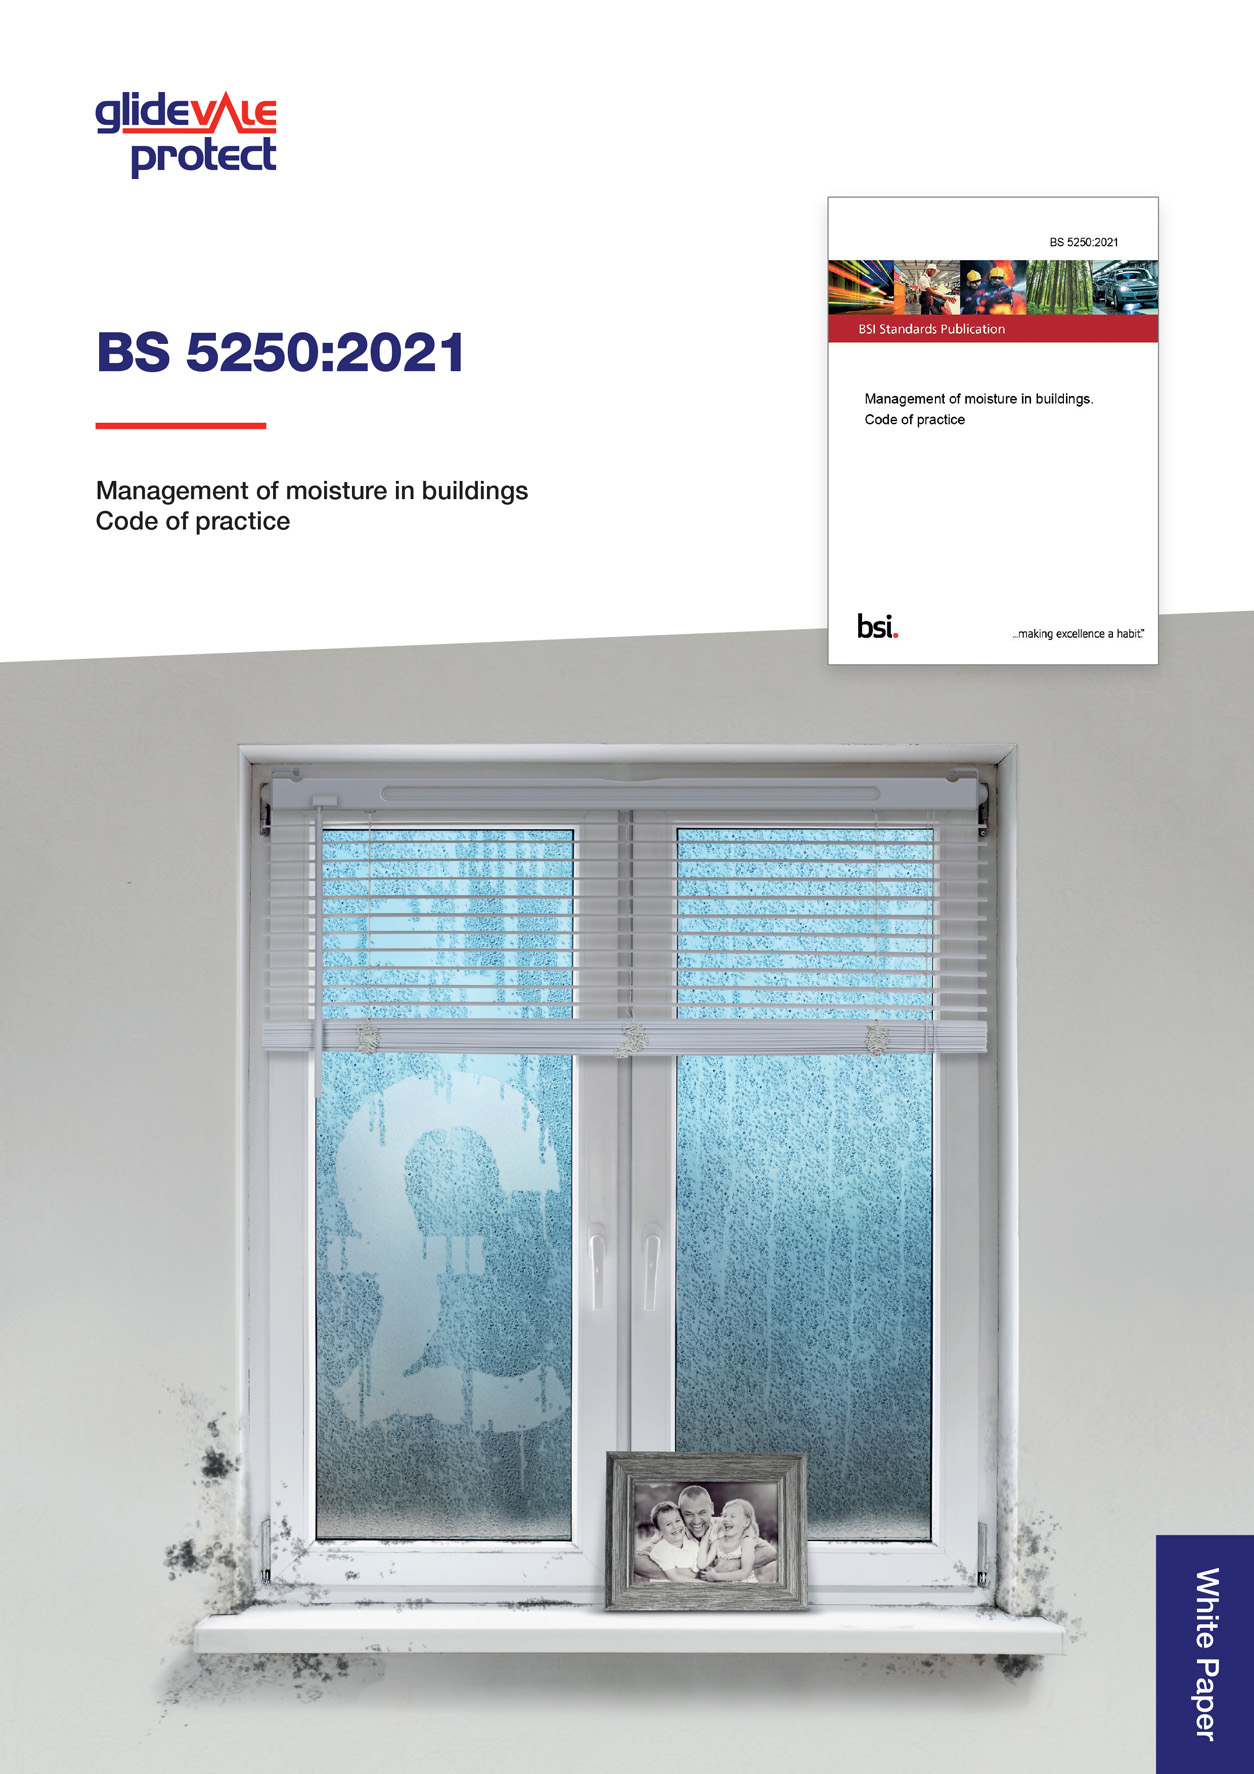 Glidevale Protect publishes white paper on management of moisture in buildings